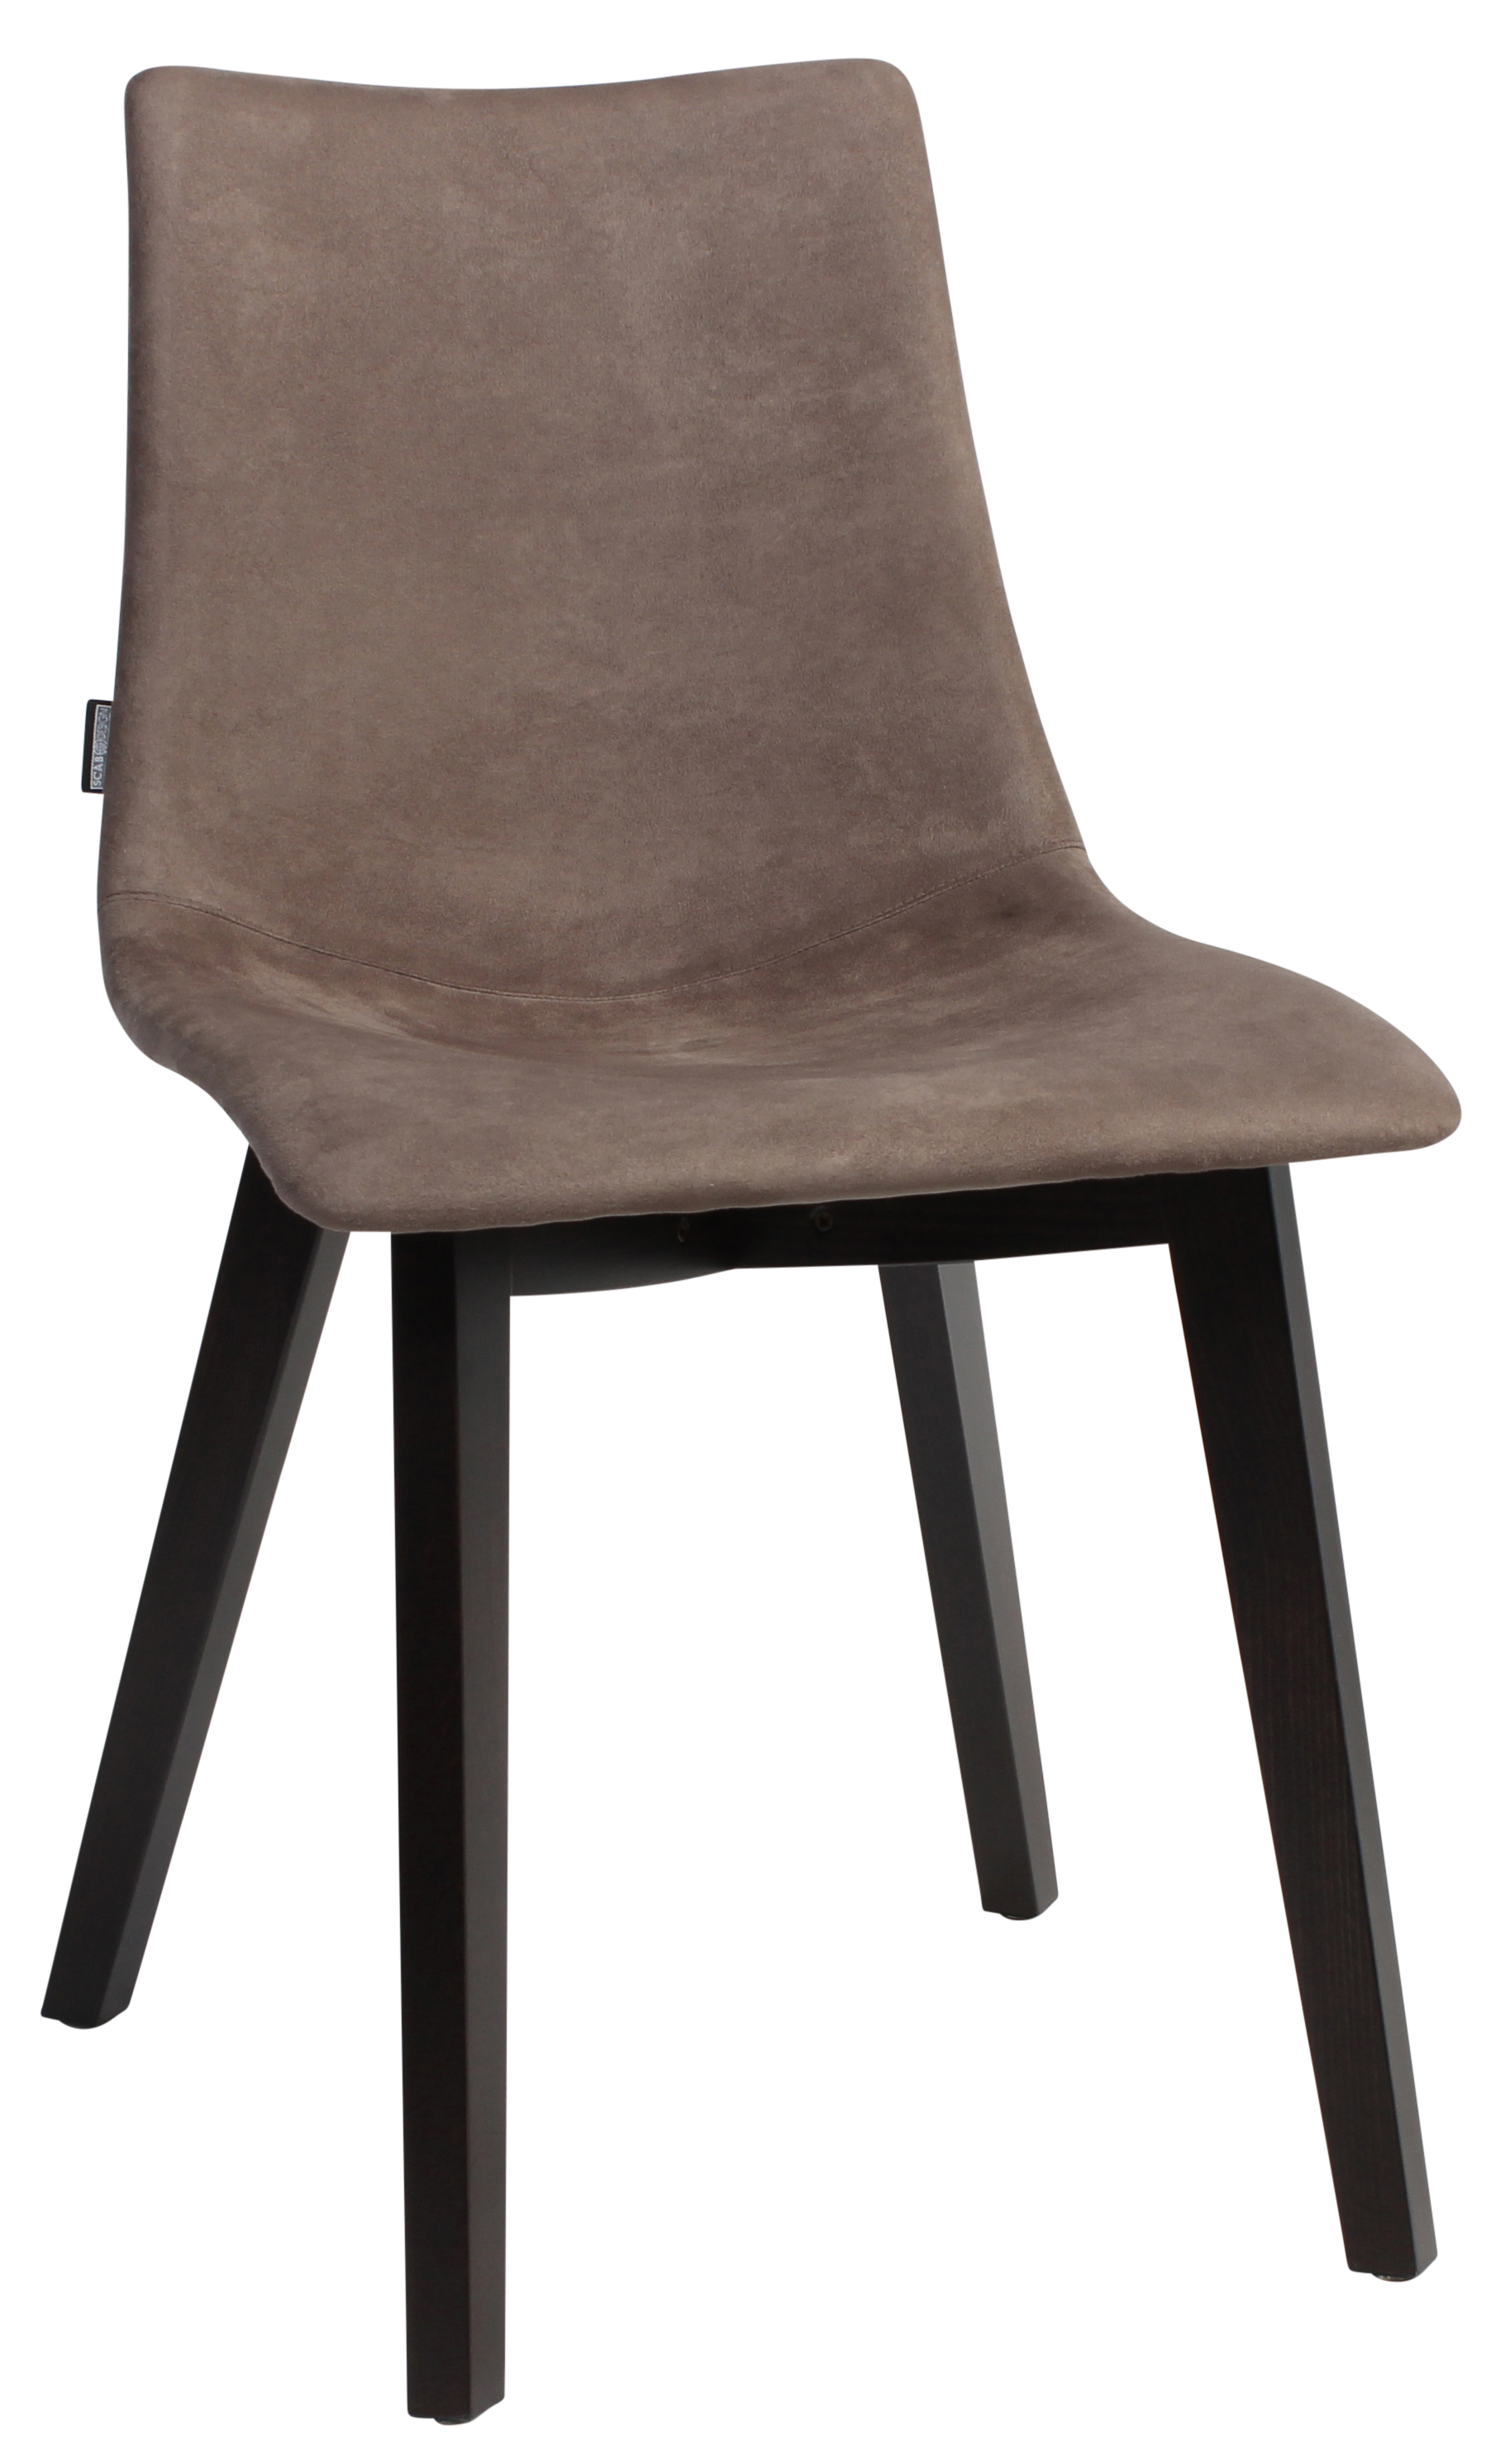 CHAIR POP TIMBER WENGE + FABRIC BROWN